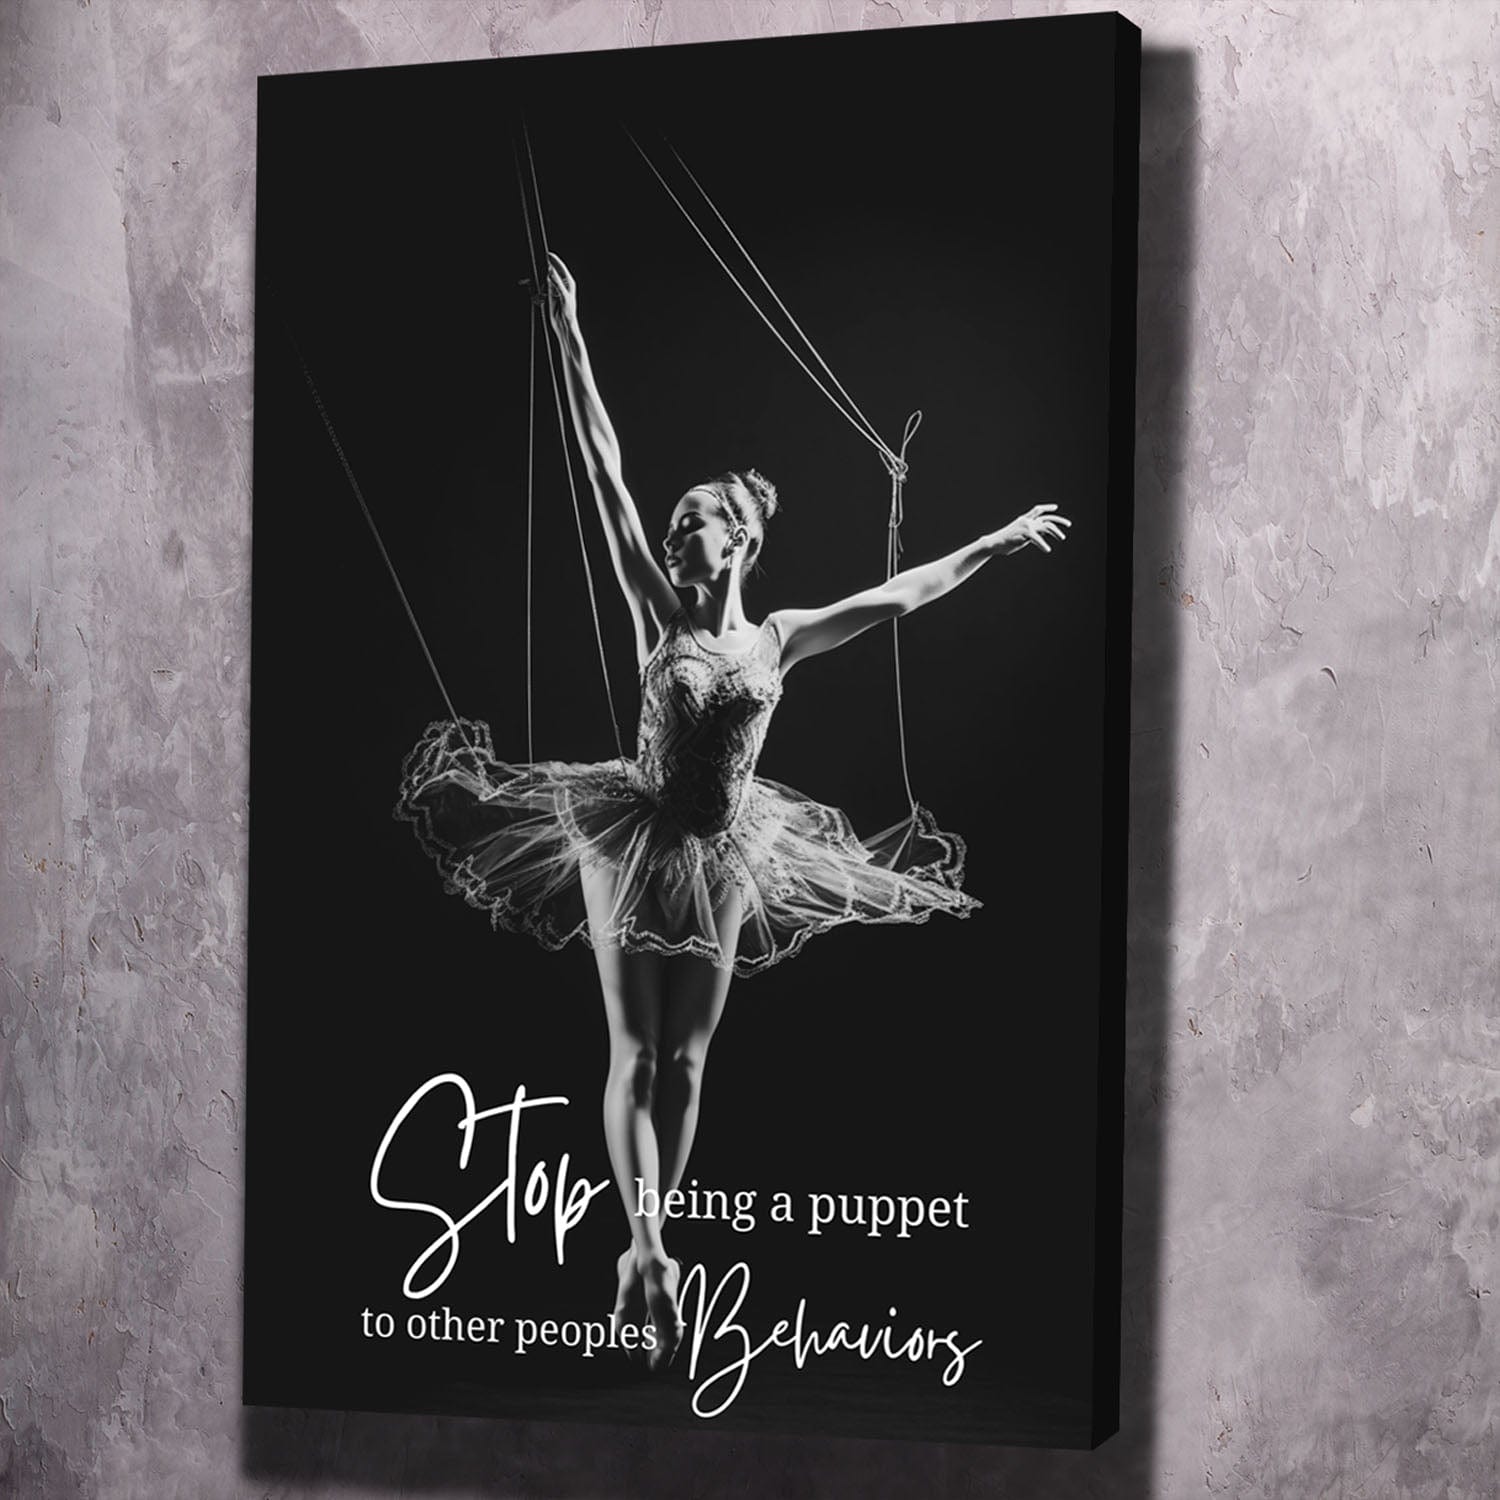 inspirational ballet quotes